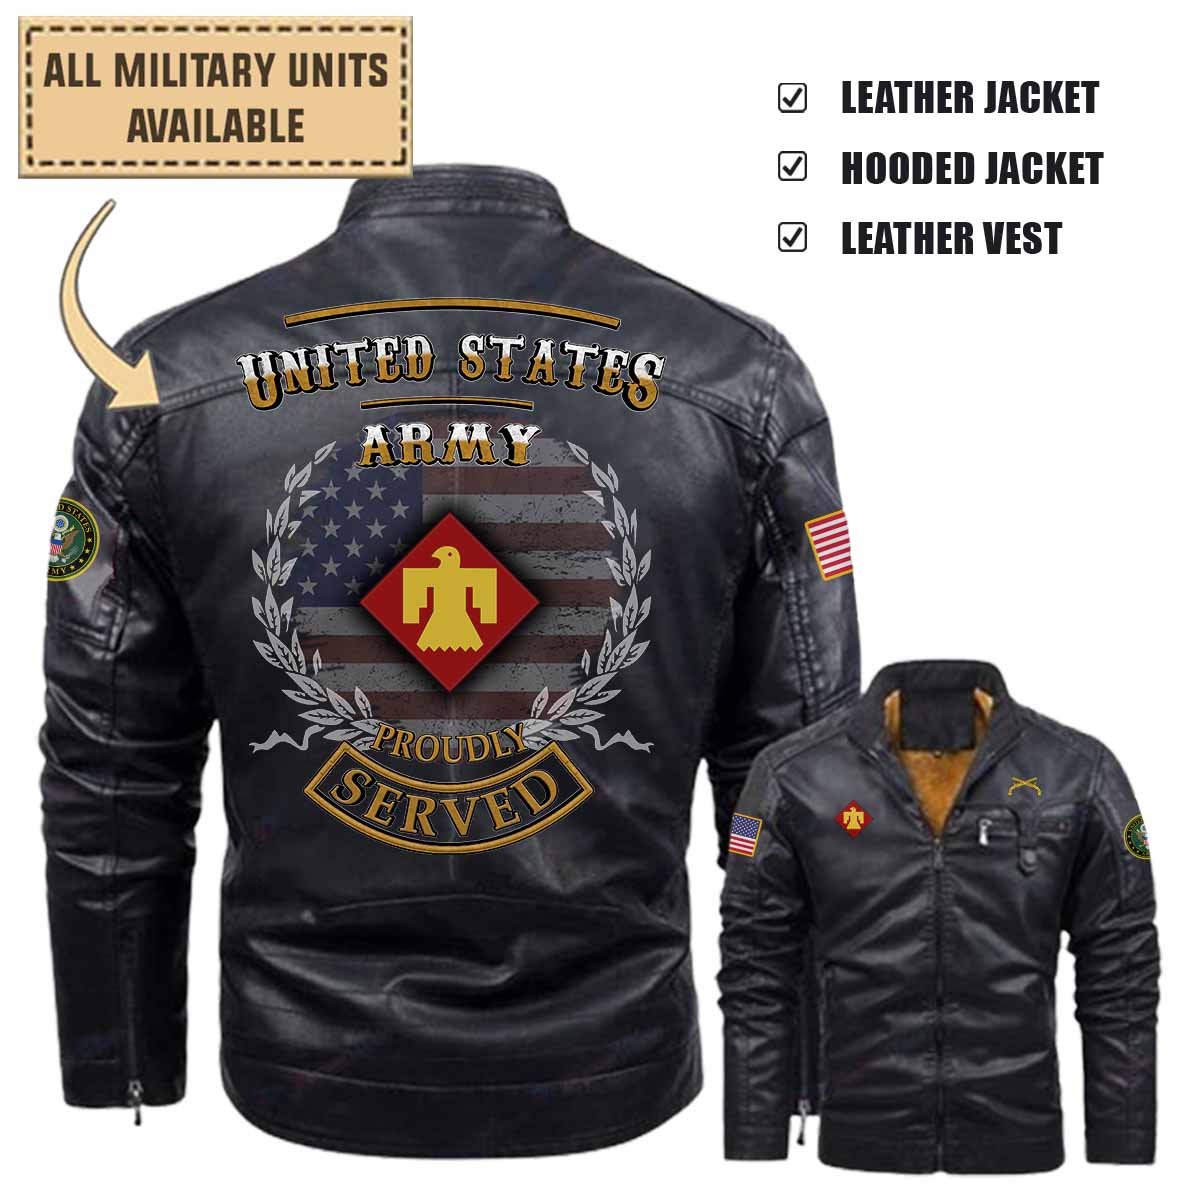 745th MP CO 745th Military Police Company, 45th IBCT_Military Leather Jacket and Vest